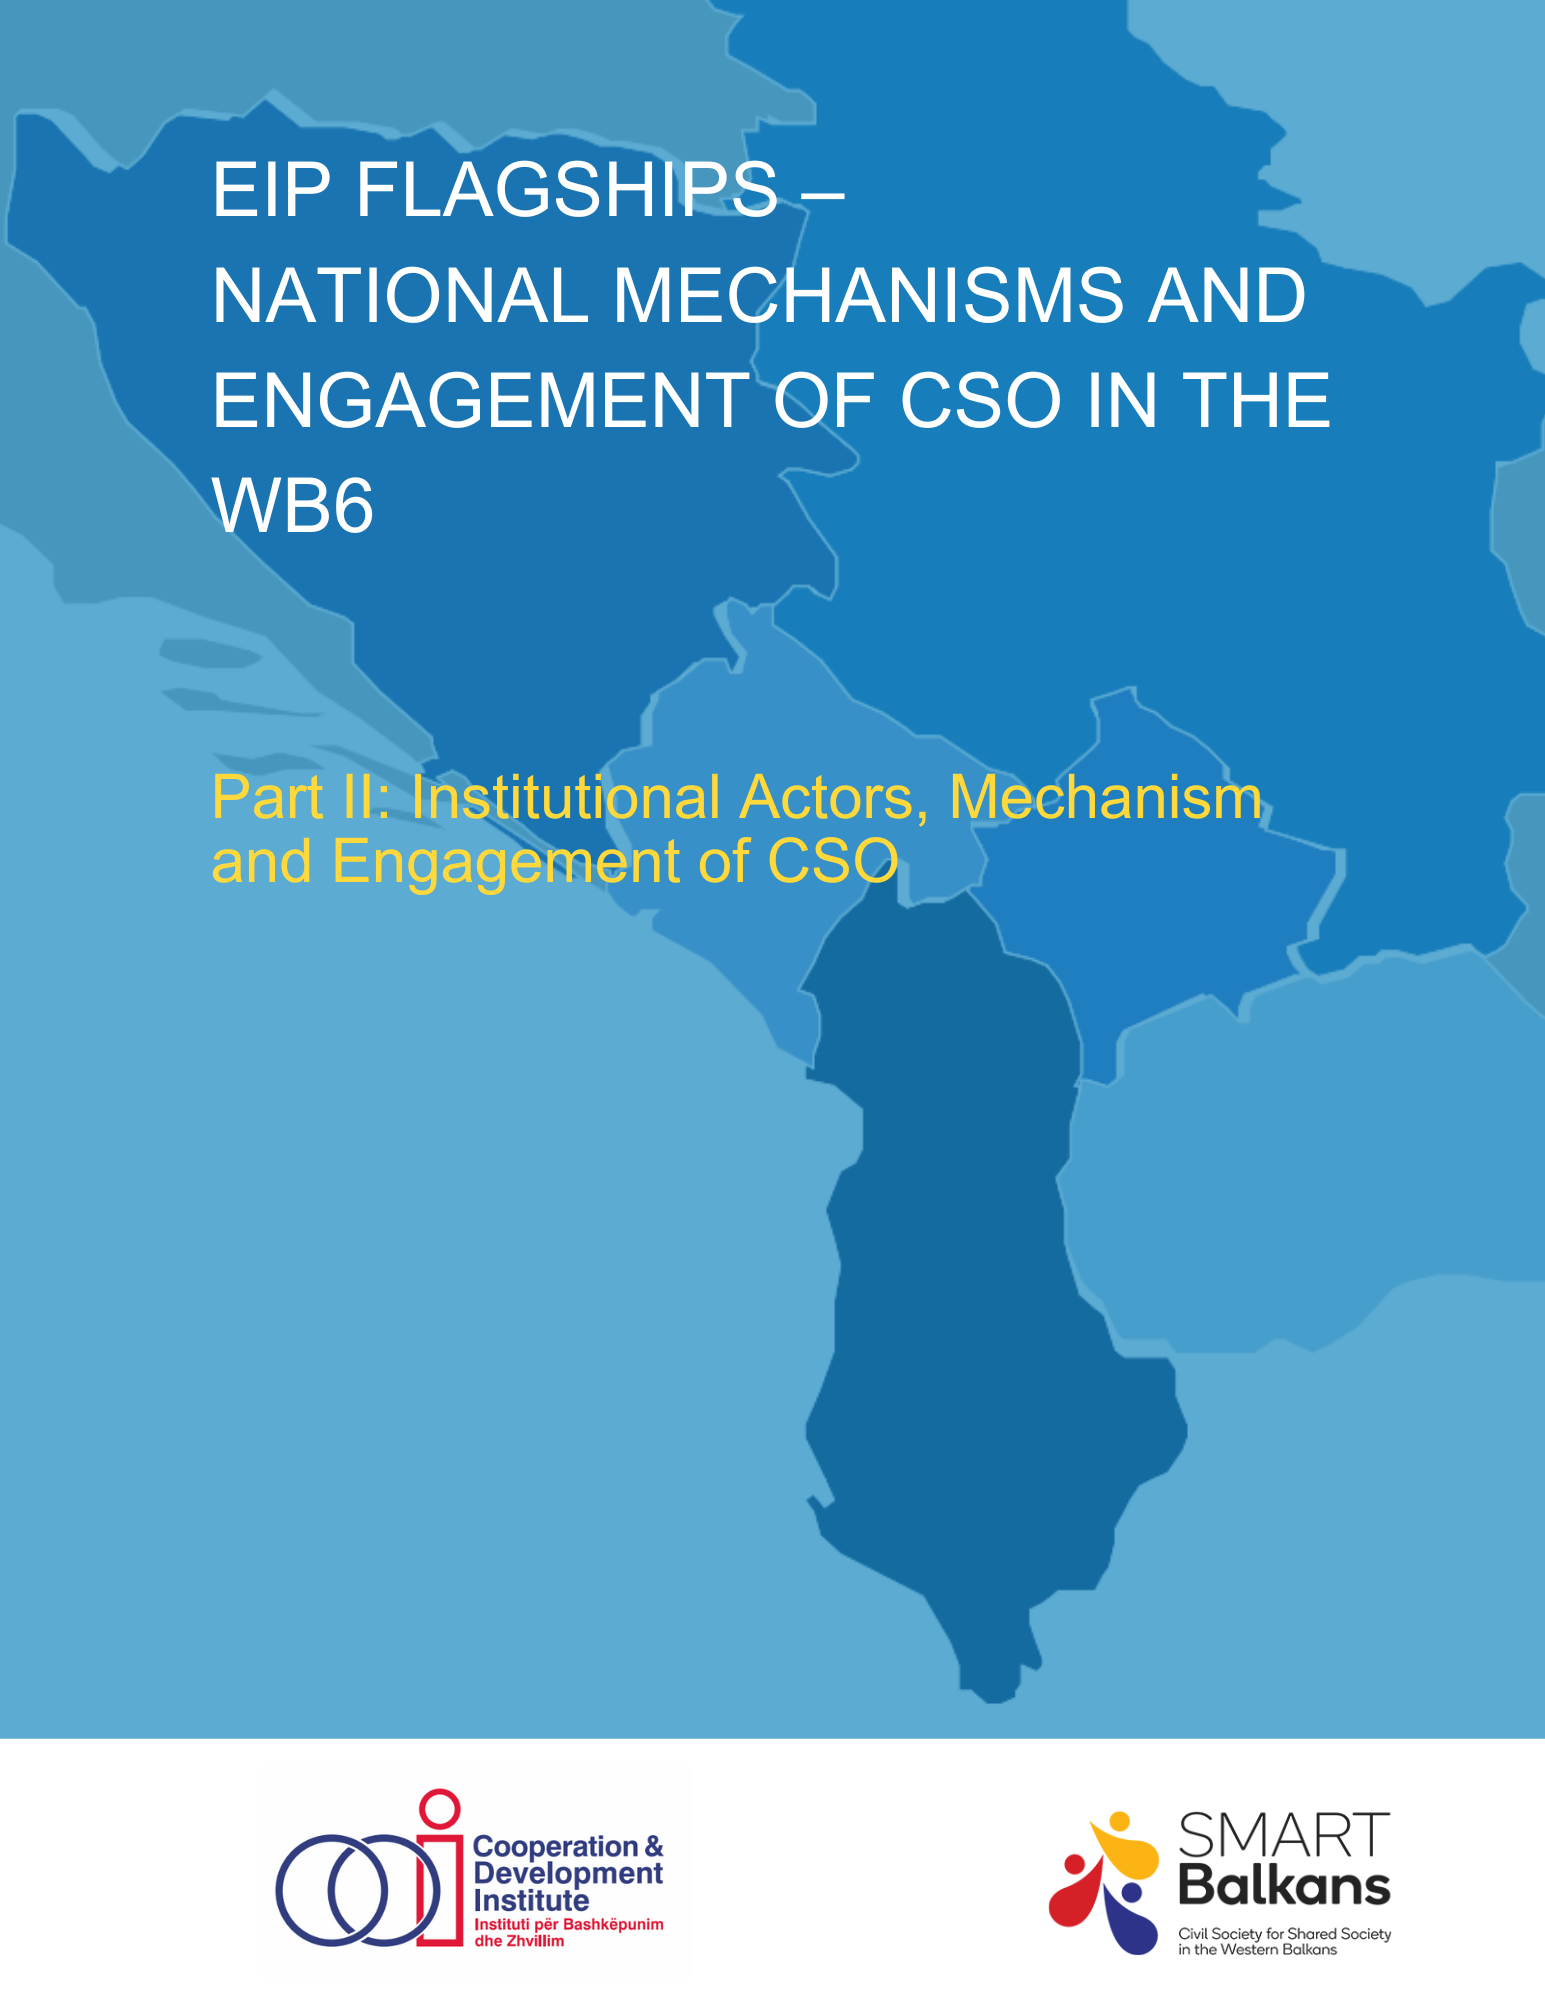 National mechanisms and engagement of CSO in the WB6